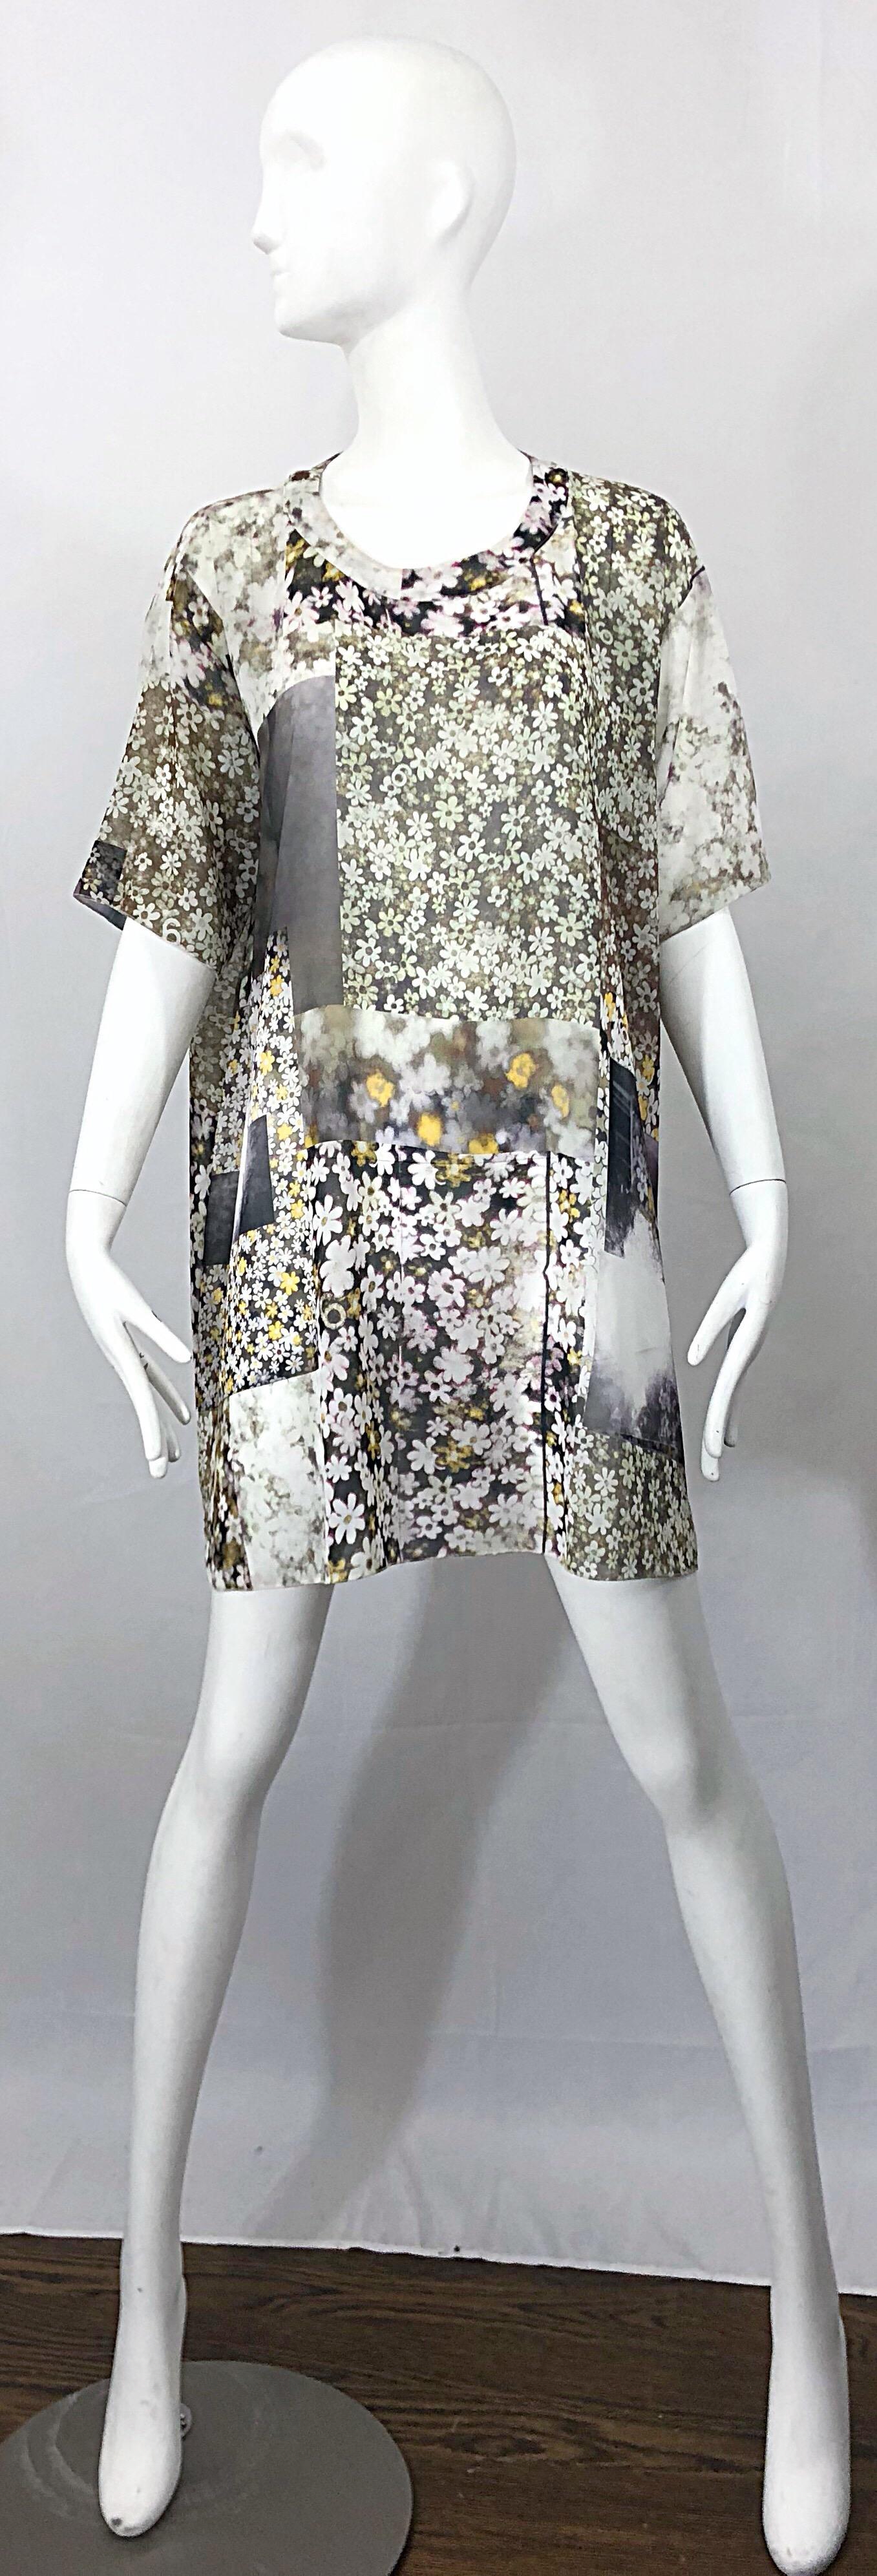 Rare MAISON MARGIELA MM6 oversized silky photo print patchwork semi sheer t-shirt dress tunic! Features warm tones in green, lavender purple, gray and yellow. Solid gray sheer panels throughout. Simply slips over the head. Great alone, or layered